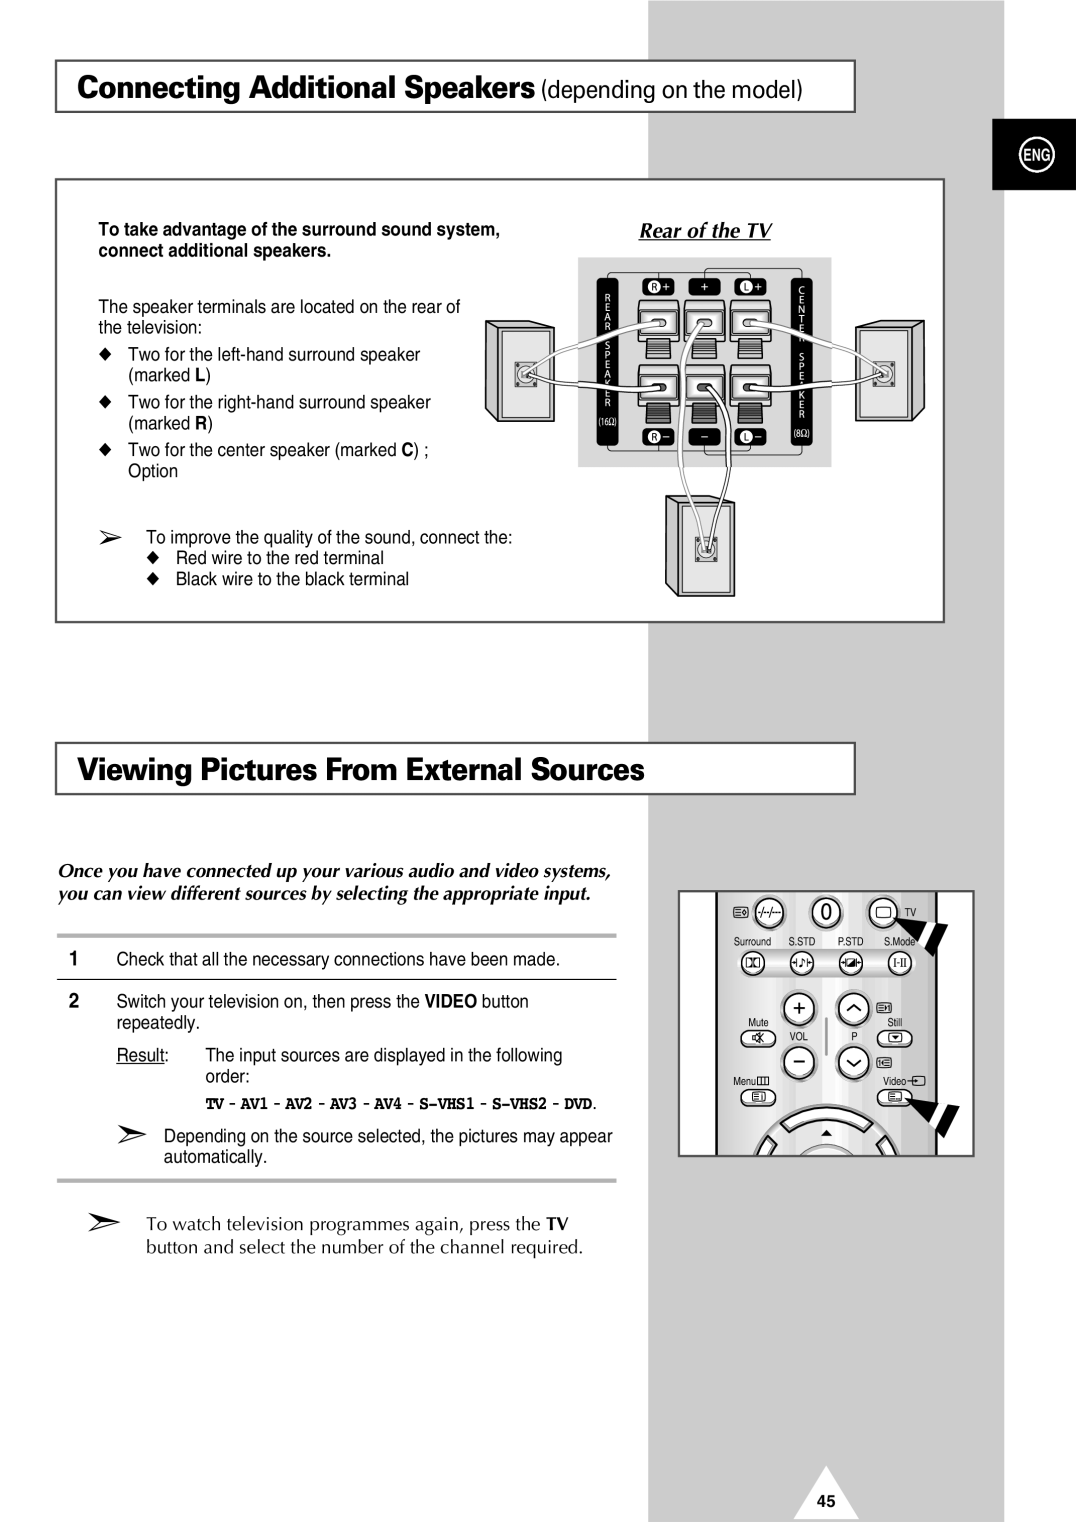 Samsung SP62J9, SP54T7 manual Connecting Additional Speakers depending on the model, Viewing Pictures From External Sources 